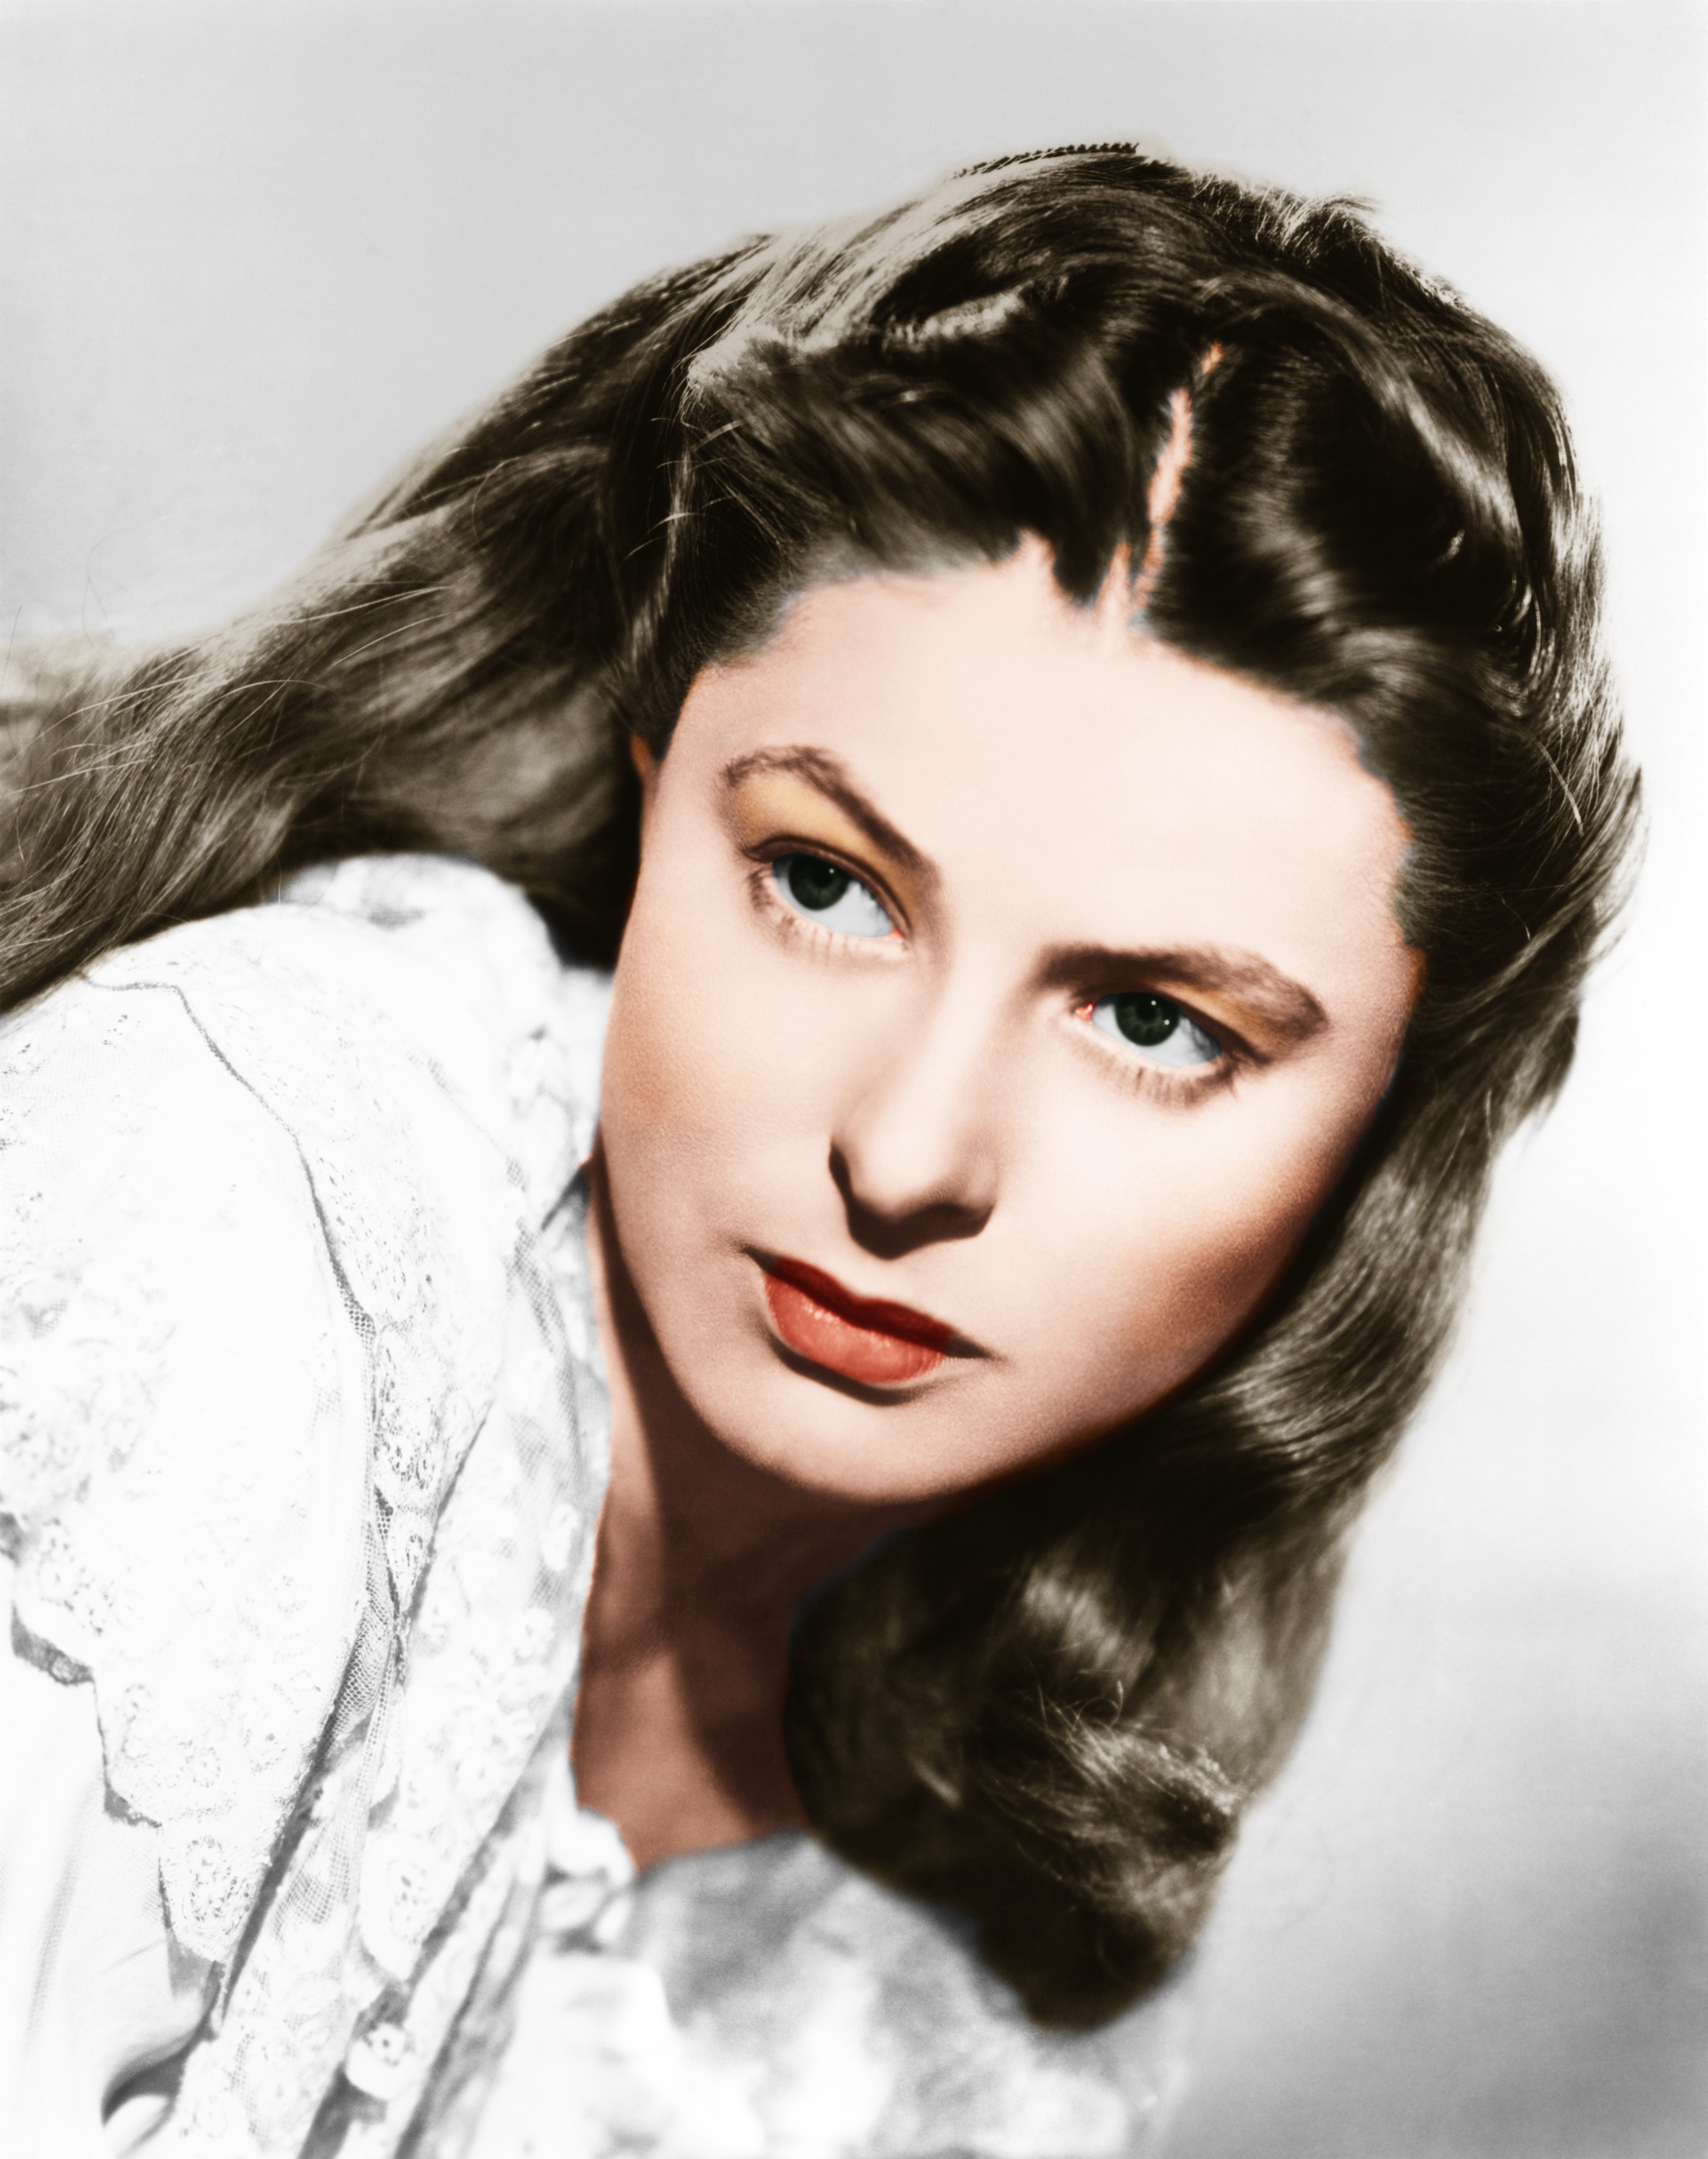 How Tall Was Ingrid Bergman - Compare her height, weight, eyes, hair ...